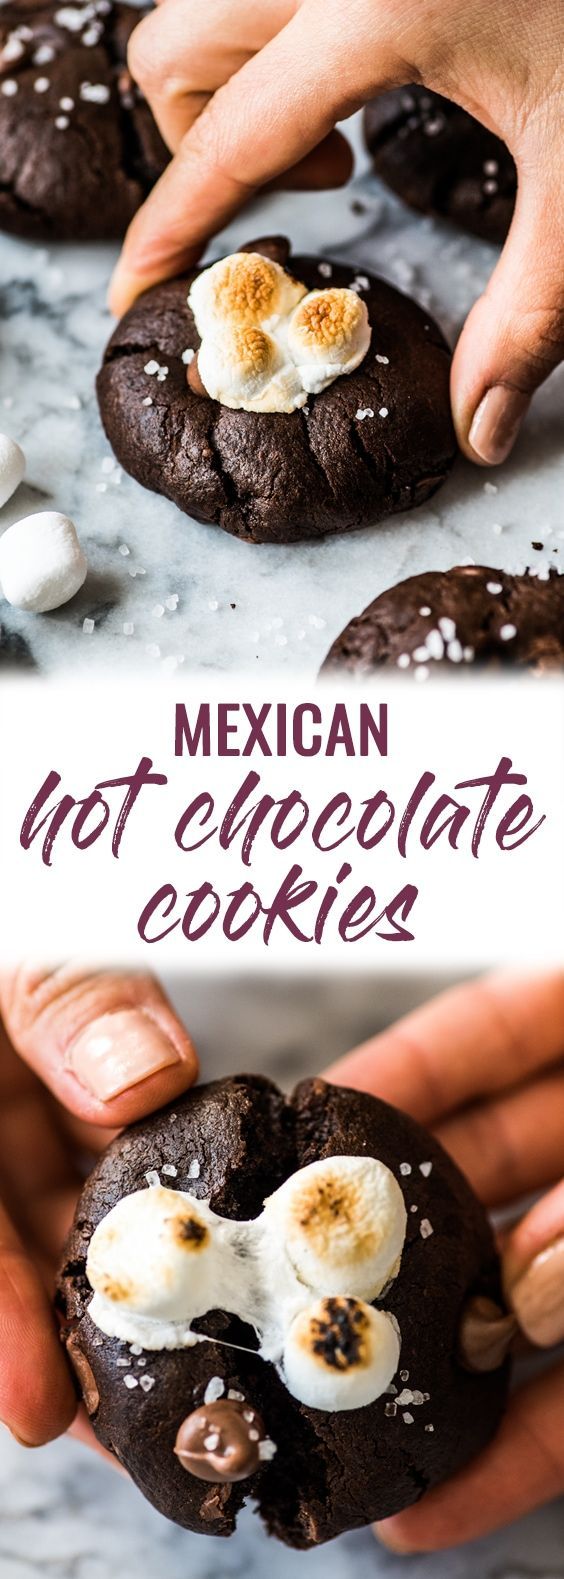 Mexican Hot Chocolate Cookies -   10 desserts Mexican chili powder ideas